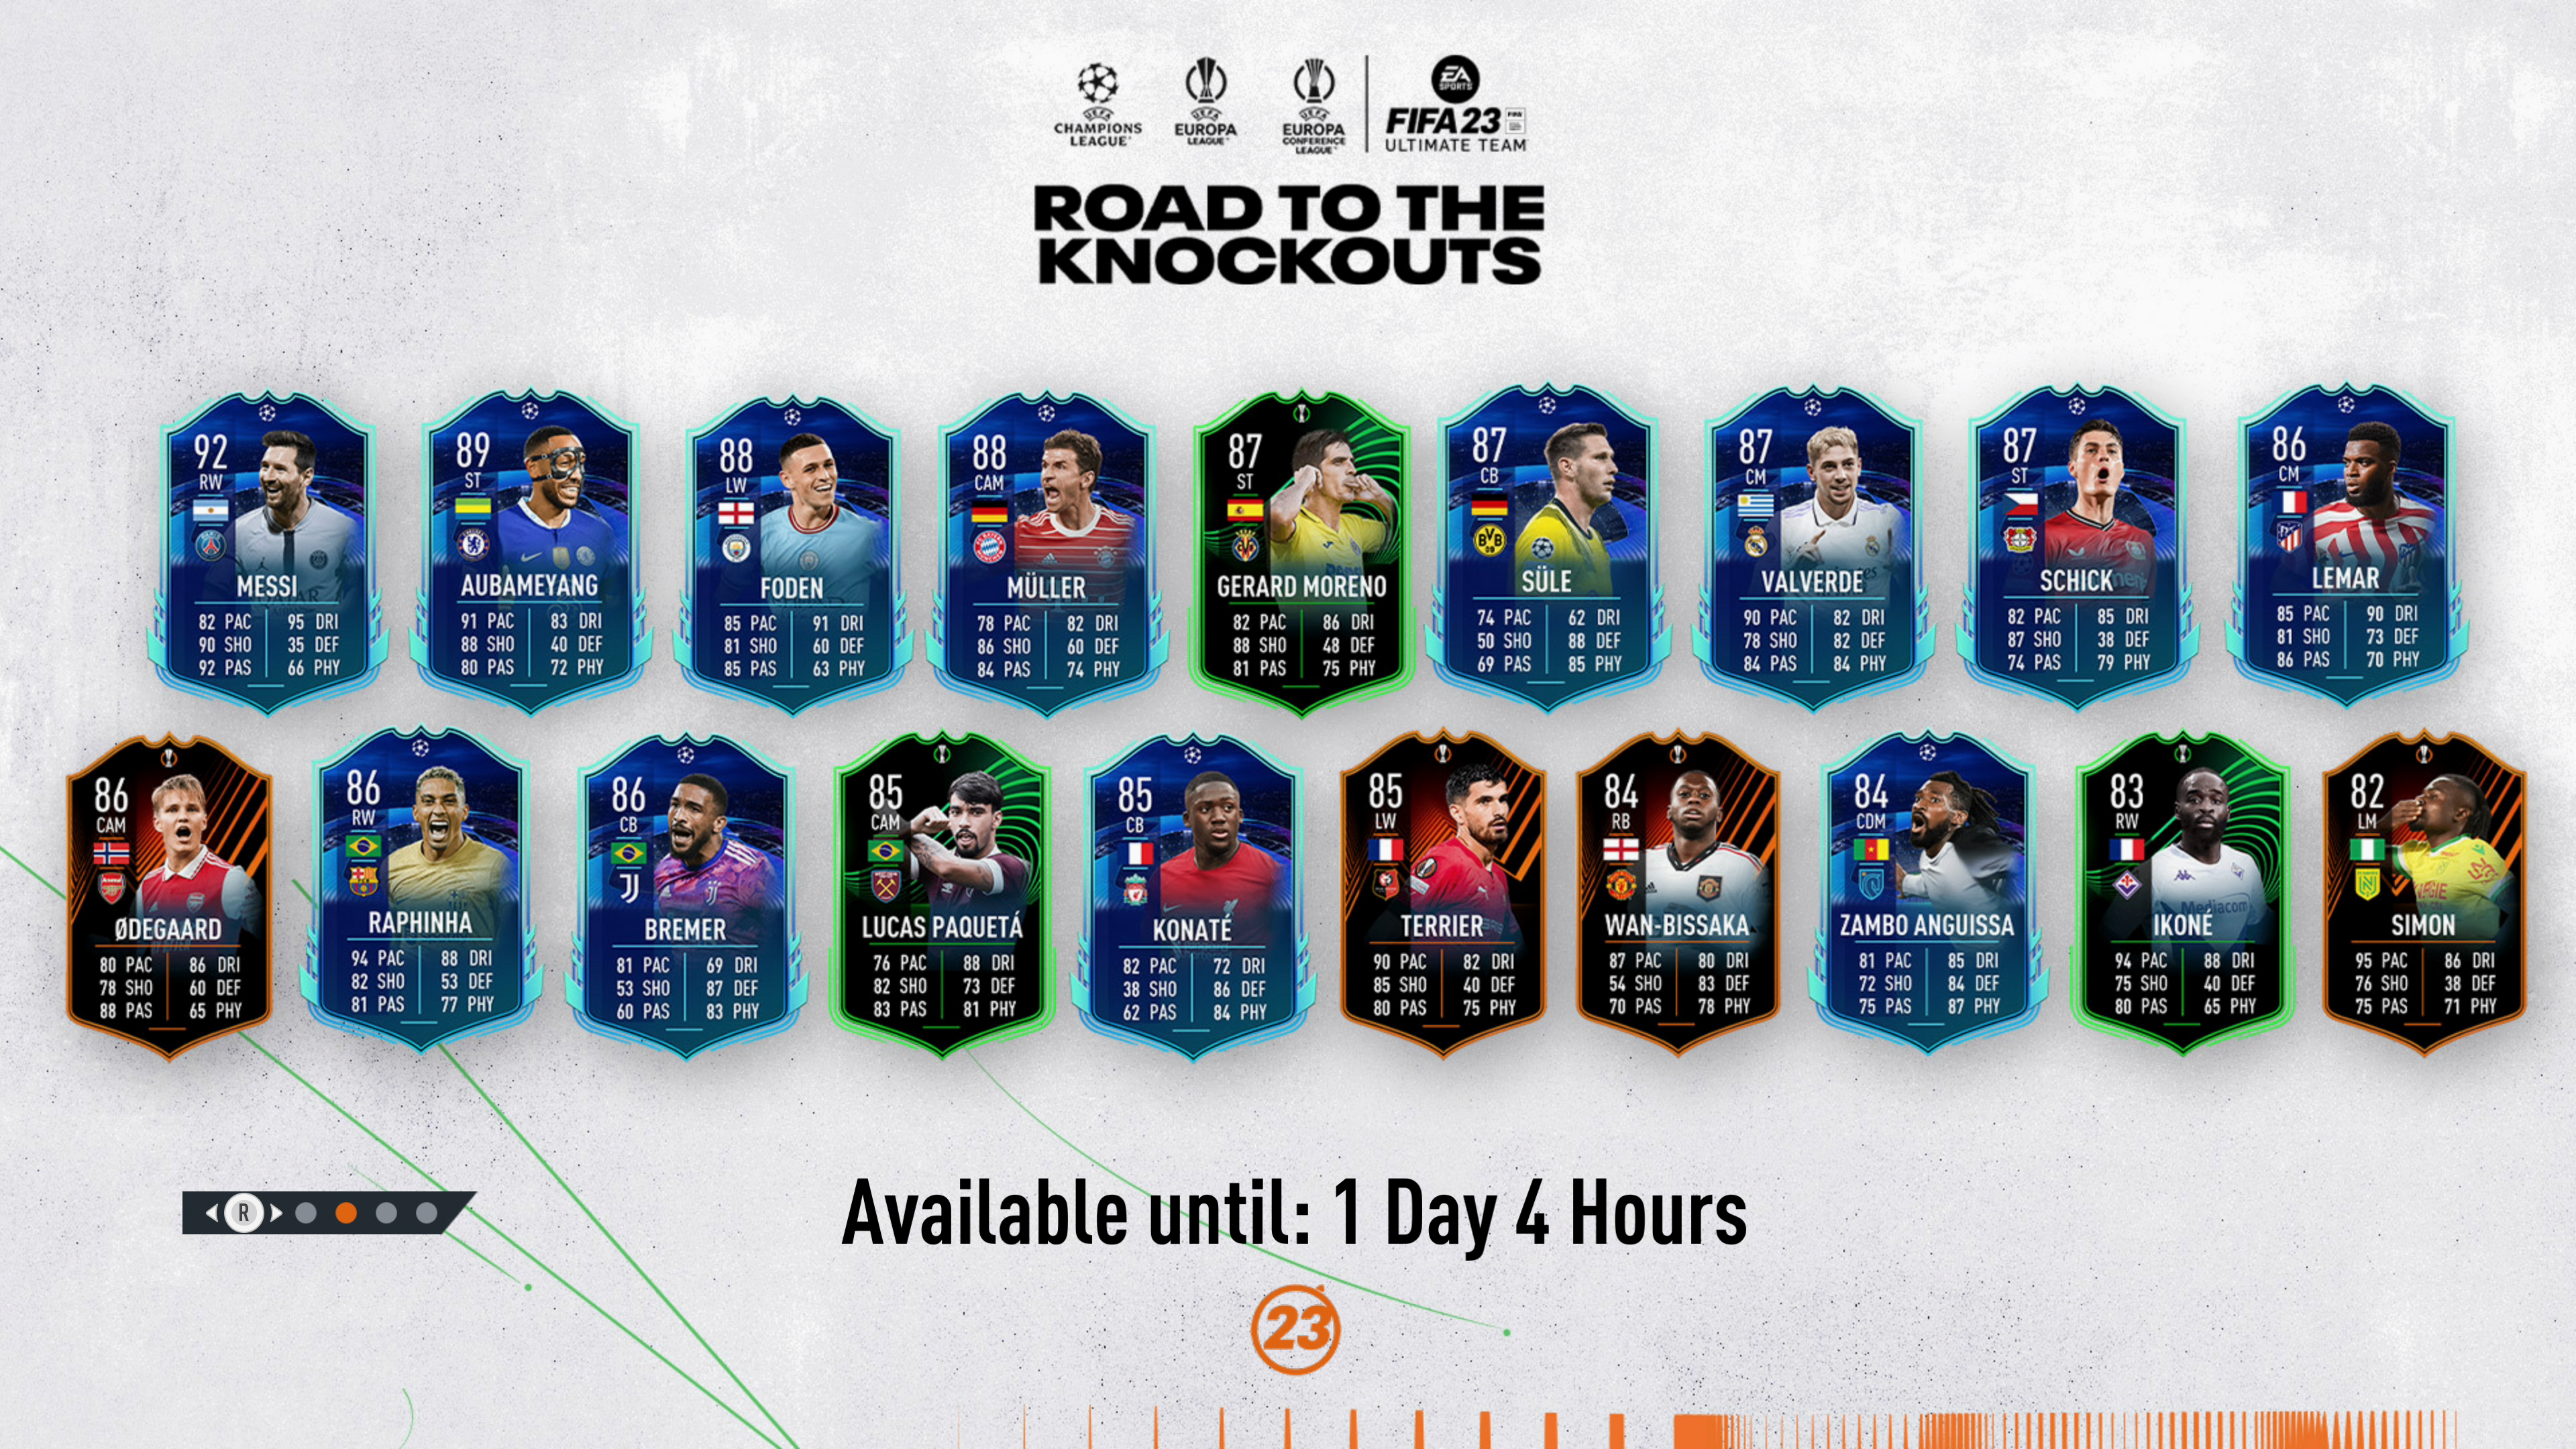 FIFA 23 - Road to the Knockouts